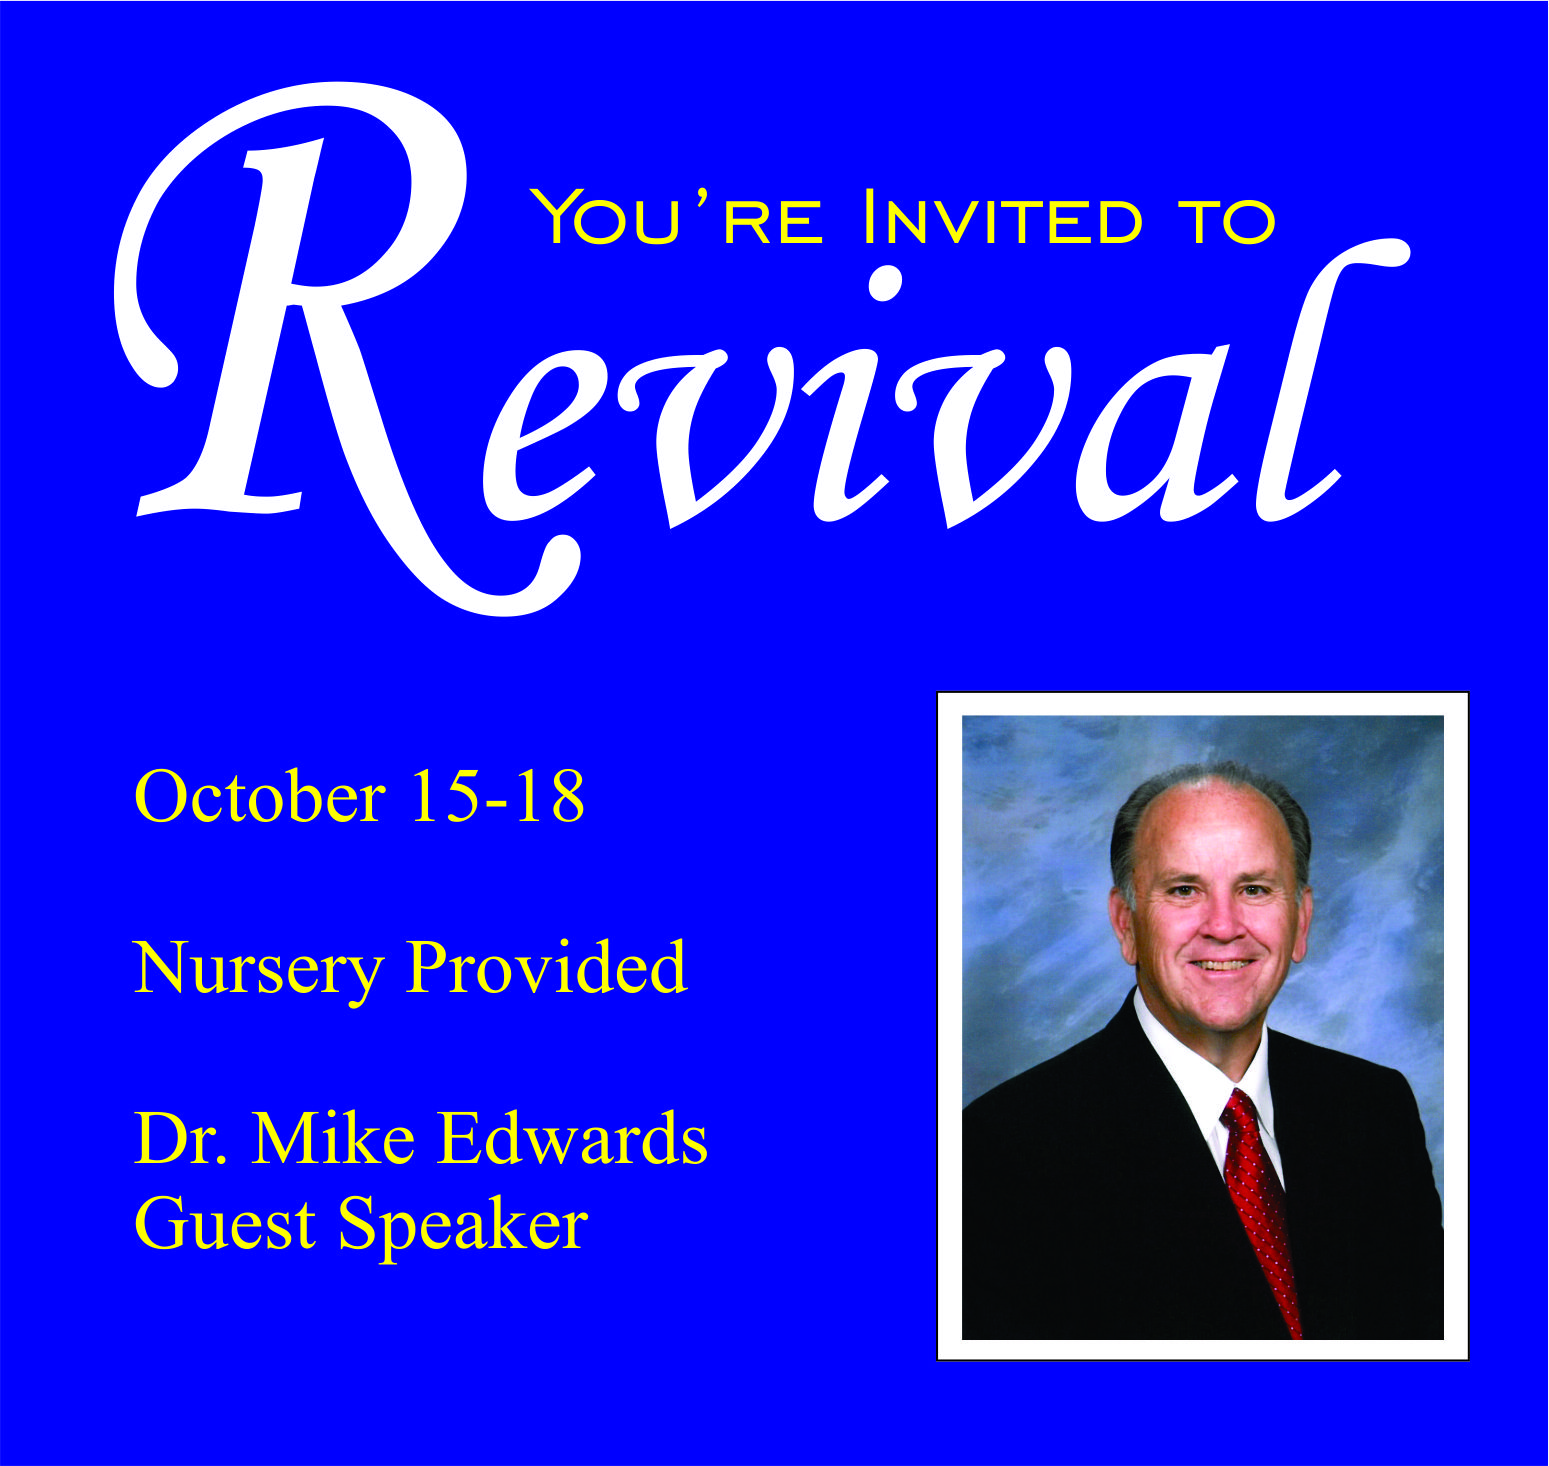 You're invited to revival with Dr. Mike Edwards, October 15-18 2023. Nursery will be provided.